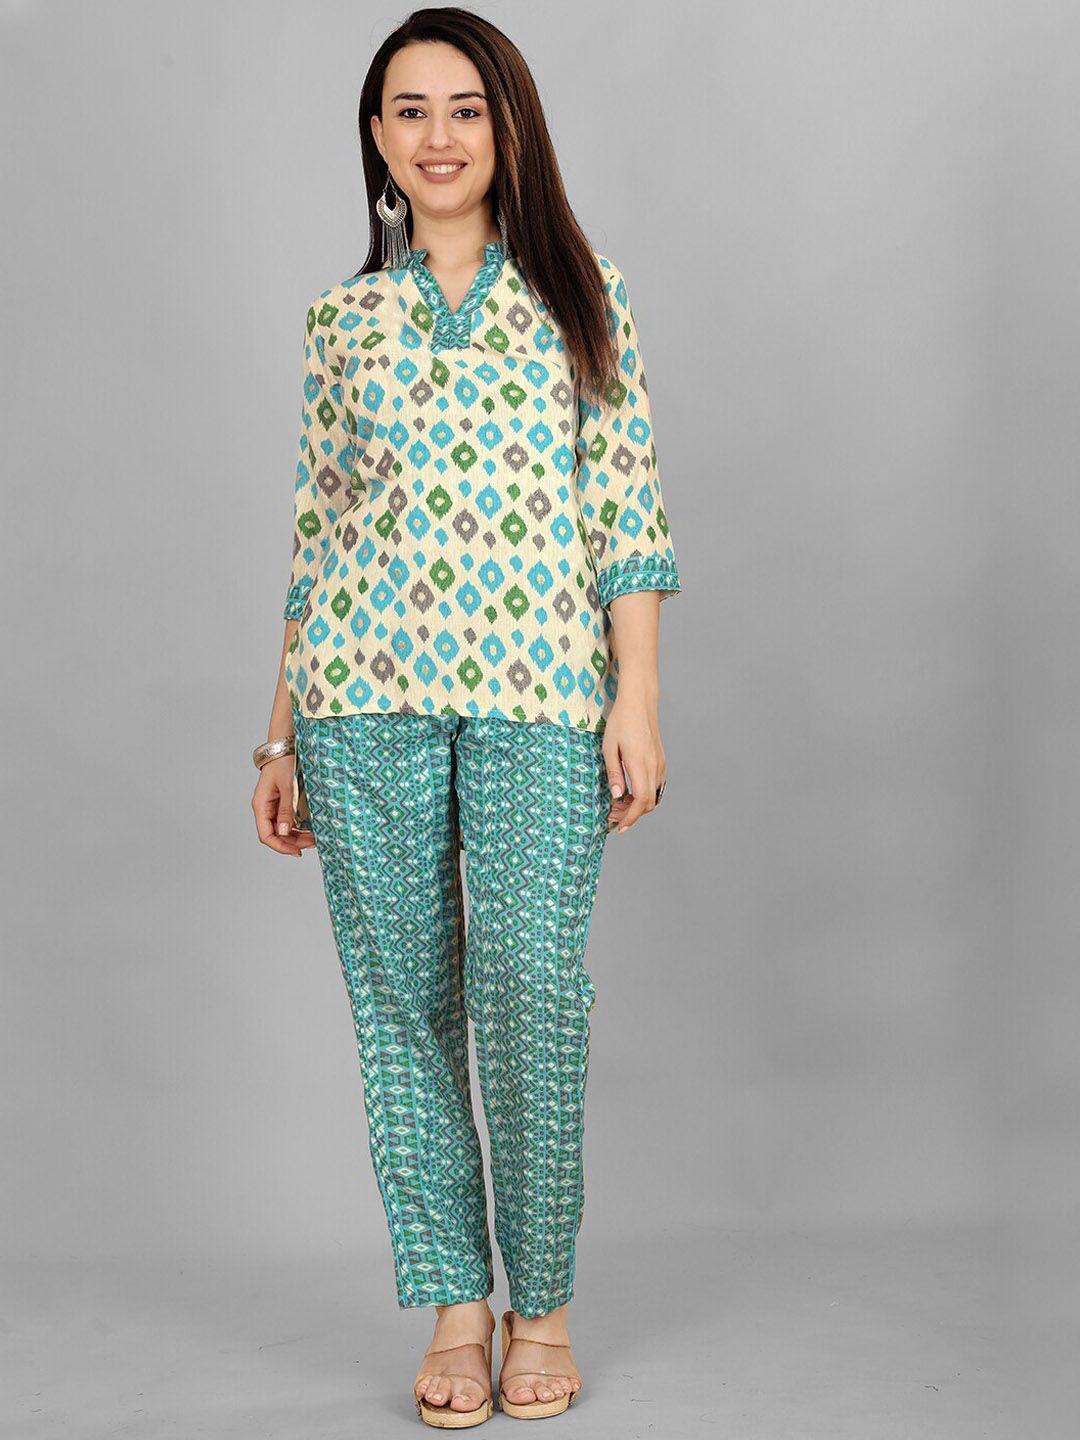 lilots printed tunic & trousers